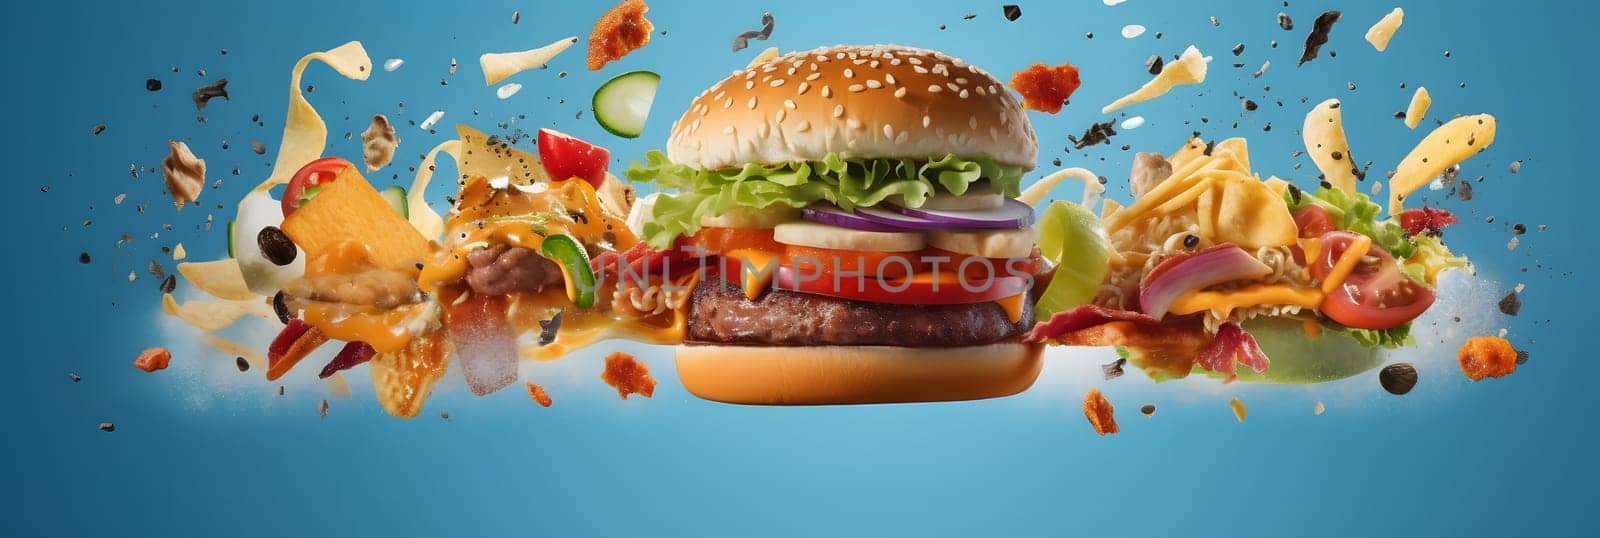 hamburger flying on blue background, neural network generated photorealistic image by z1b